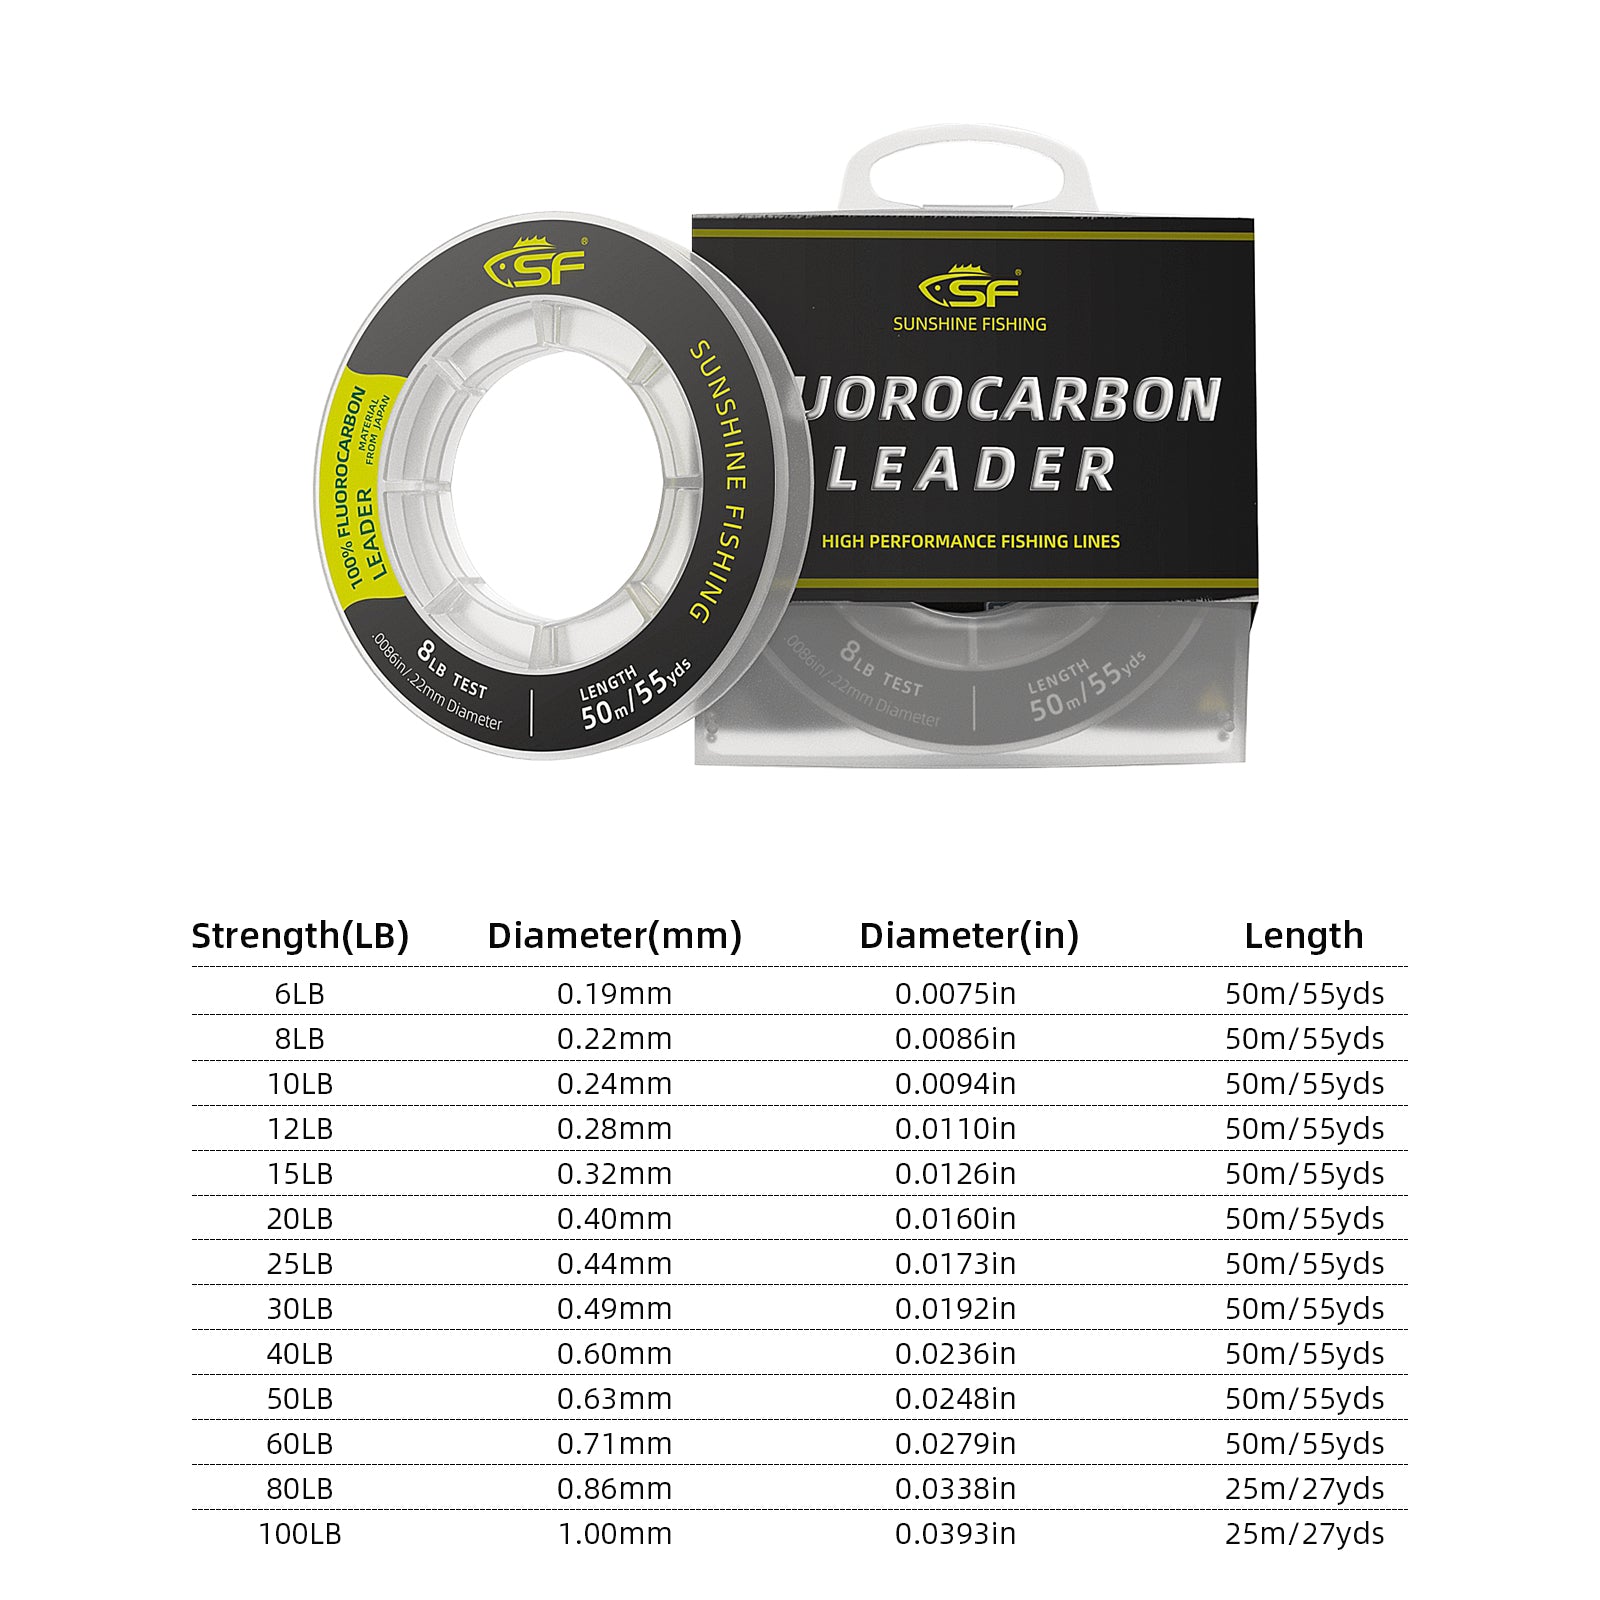 ThornsLine 100% Pure Fluorocarbon Fishing Line - Premium Leader Material  from Japan - High Strength, Abrasion-Resistant, Fast Sinking - Freshwater  and